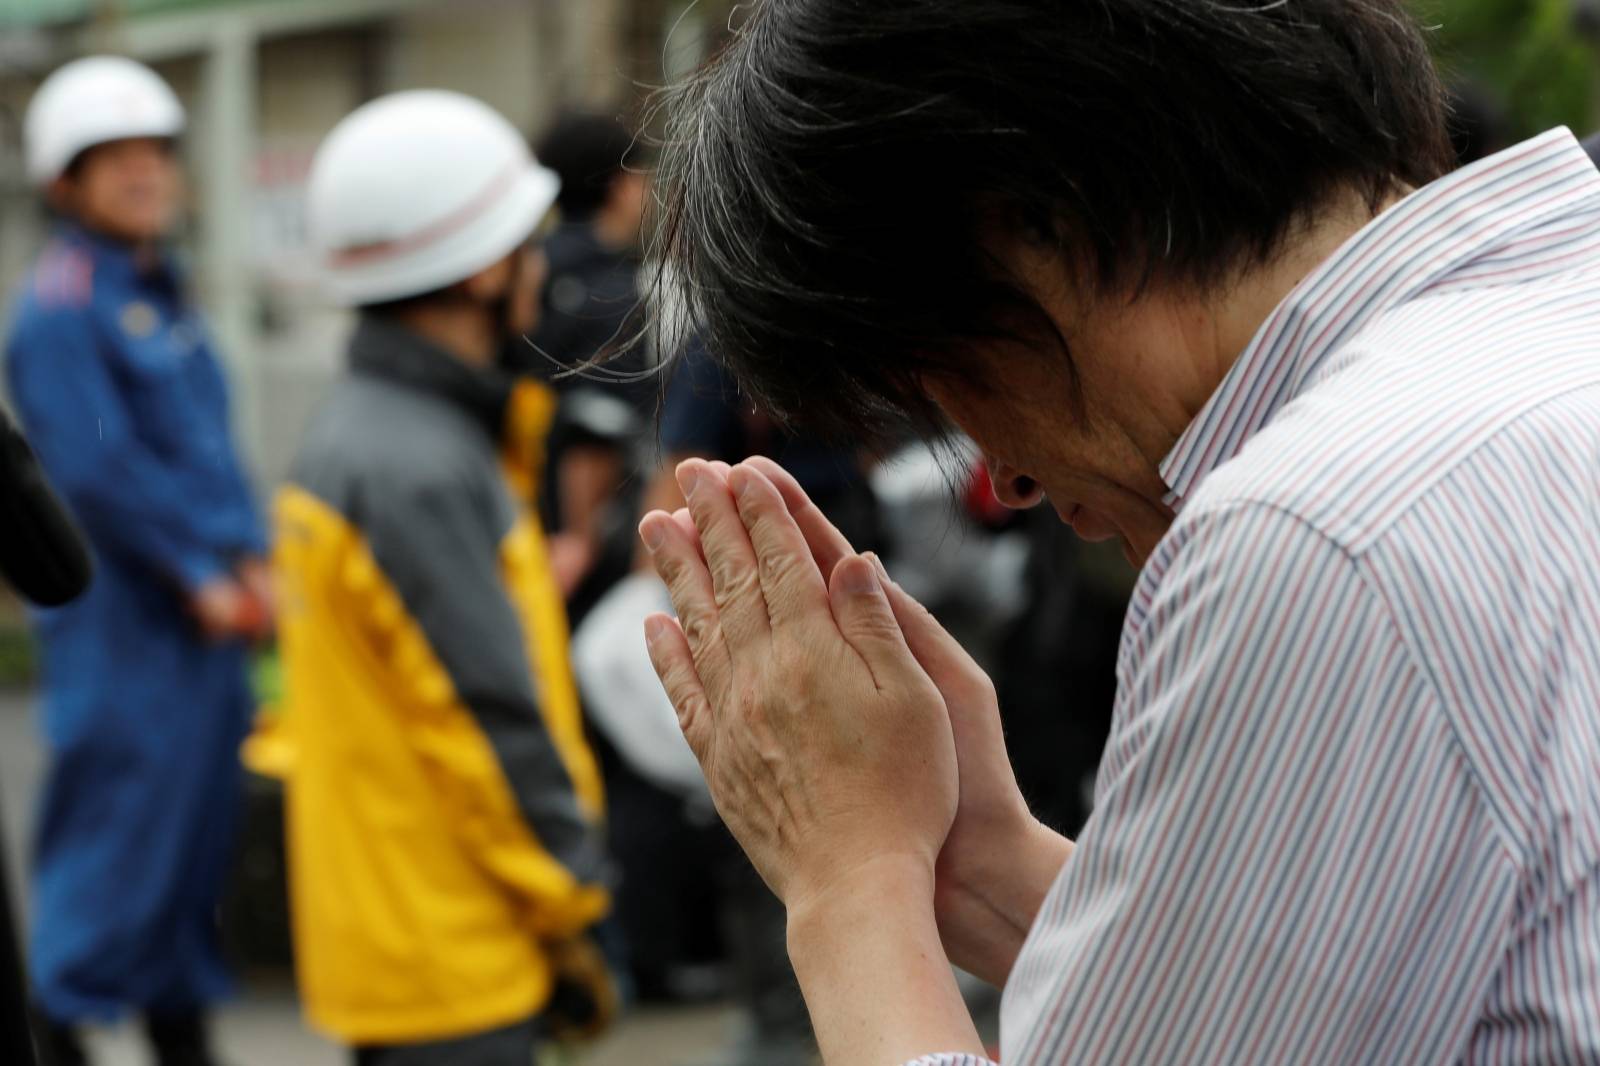 A man prays for the victims of the arson attack near the torced Kyoto Animation building n Kyoto